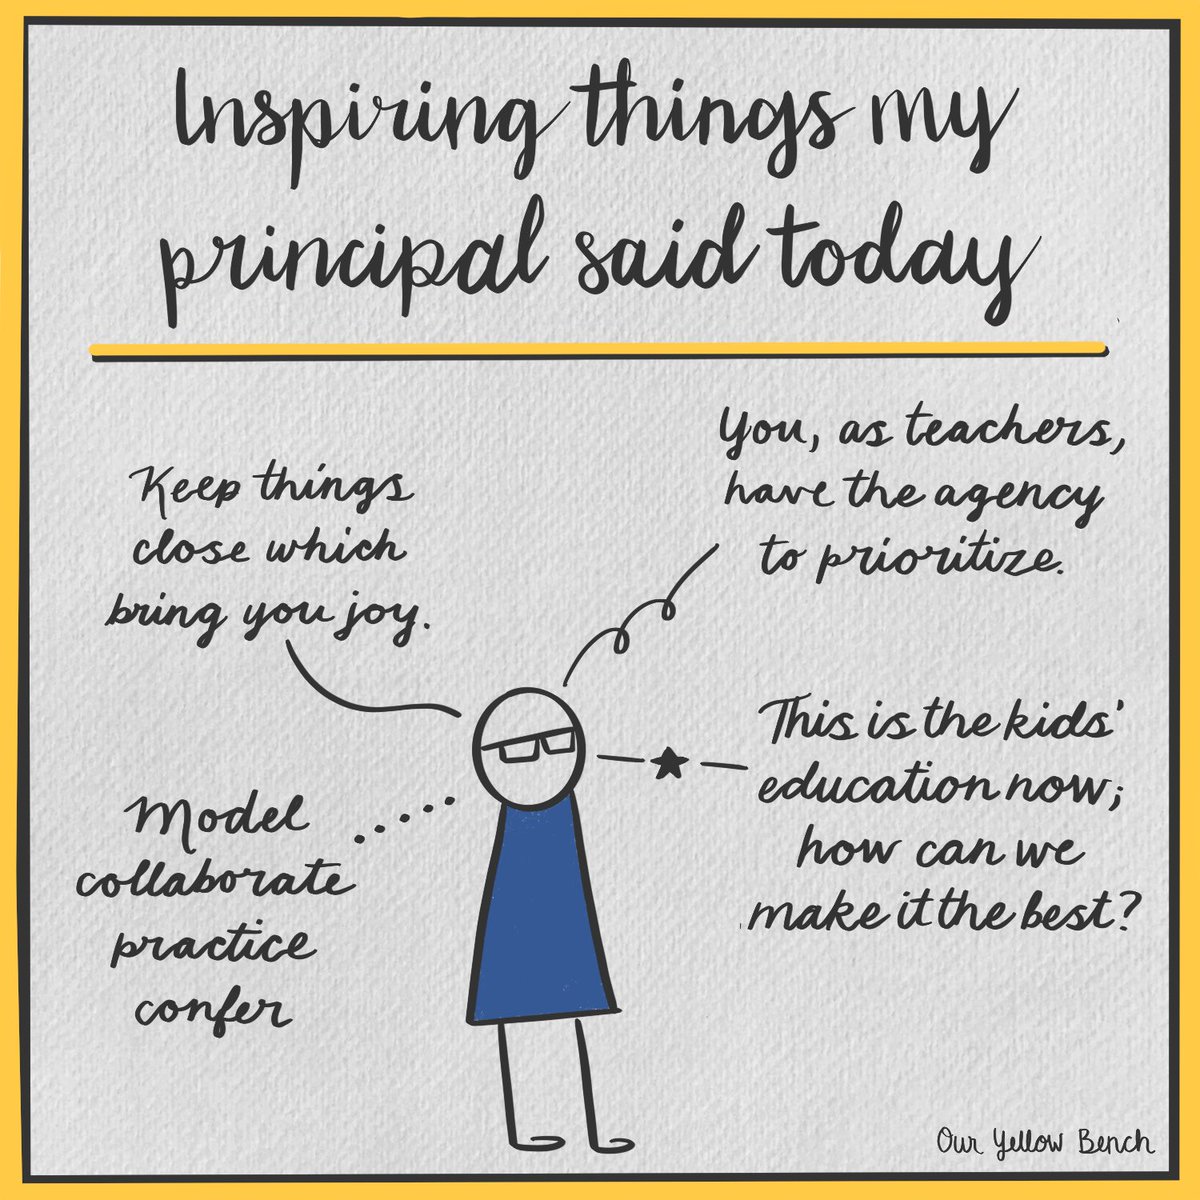 Back to school virtually and absolutely inspired by our principal @butcher74 for focusing on the #learning and keeping it real! @BBISlearning 

#sketchnotes #teacherinspiration #teachertruth #internationalteacher #positivevibes